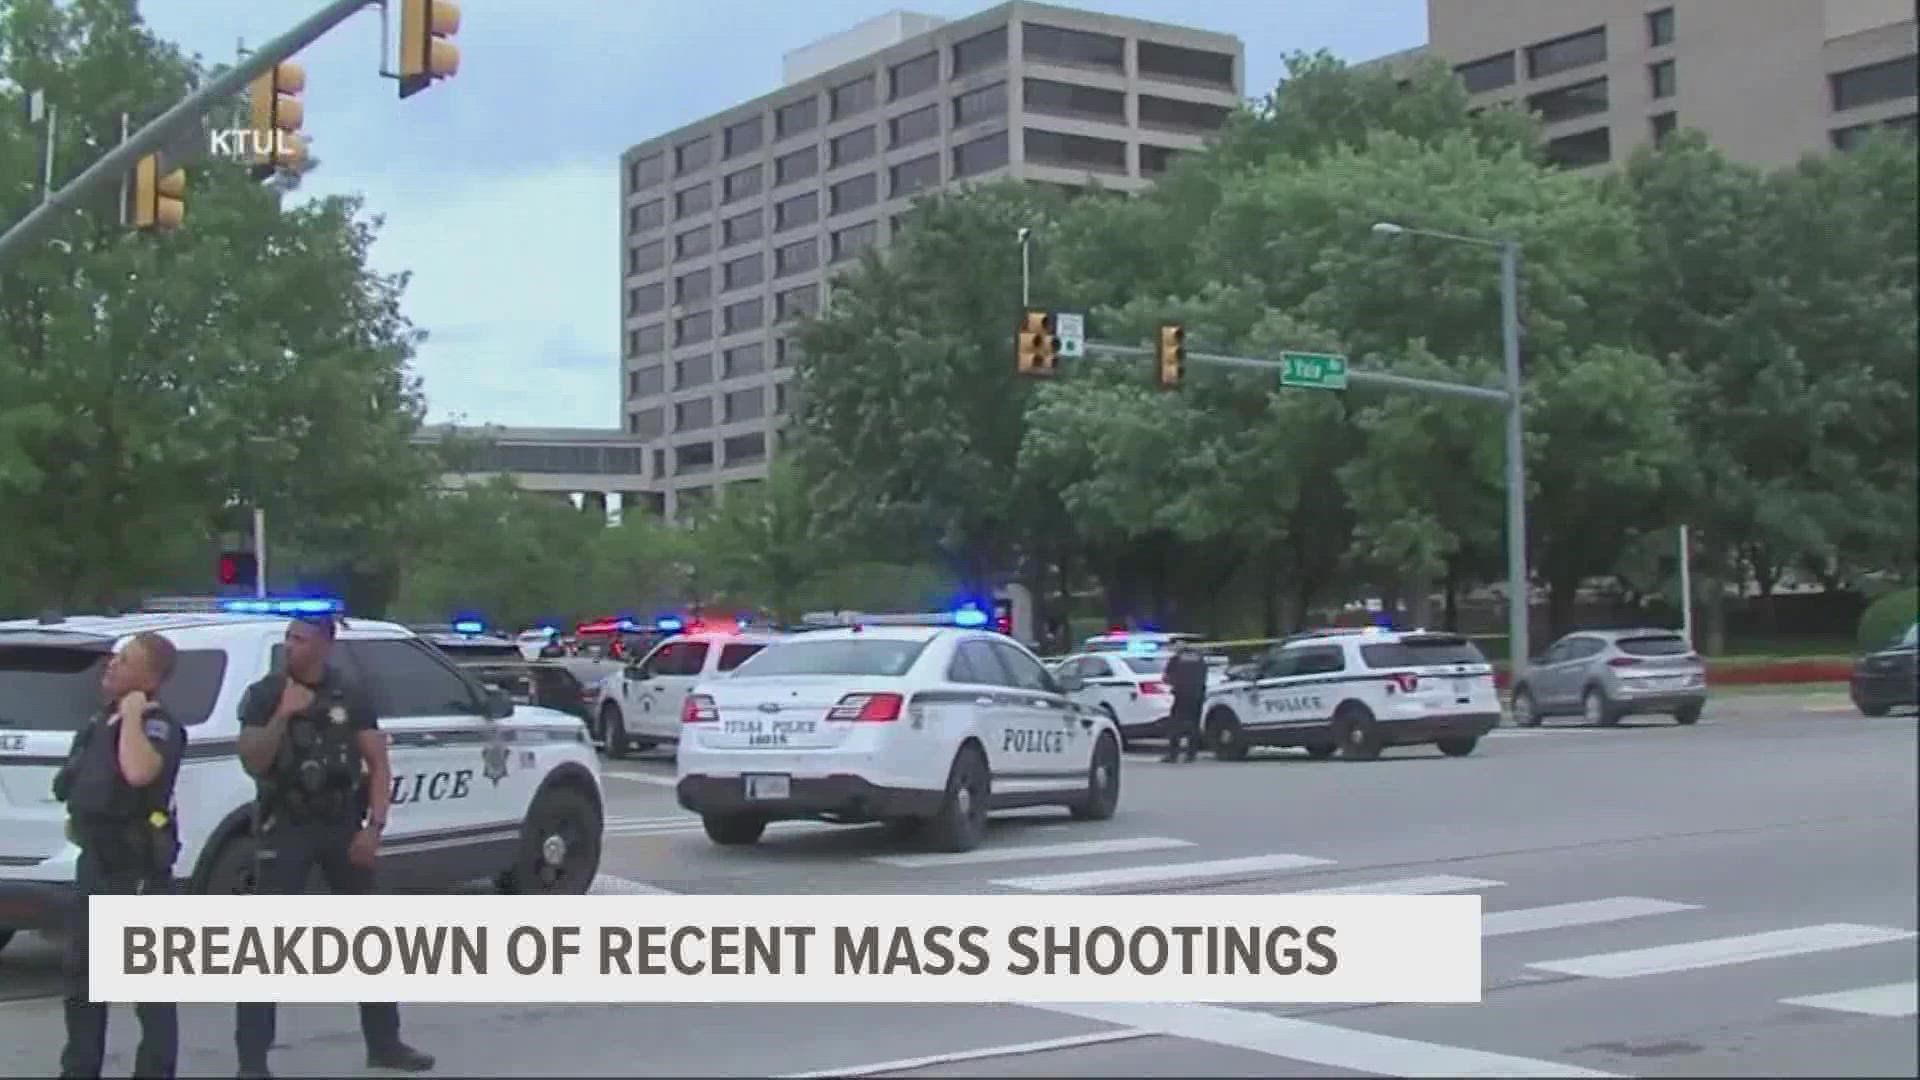 Local 5 has the latest on the deadly shooting in Tulsa, OK.